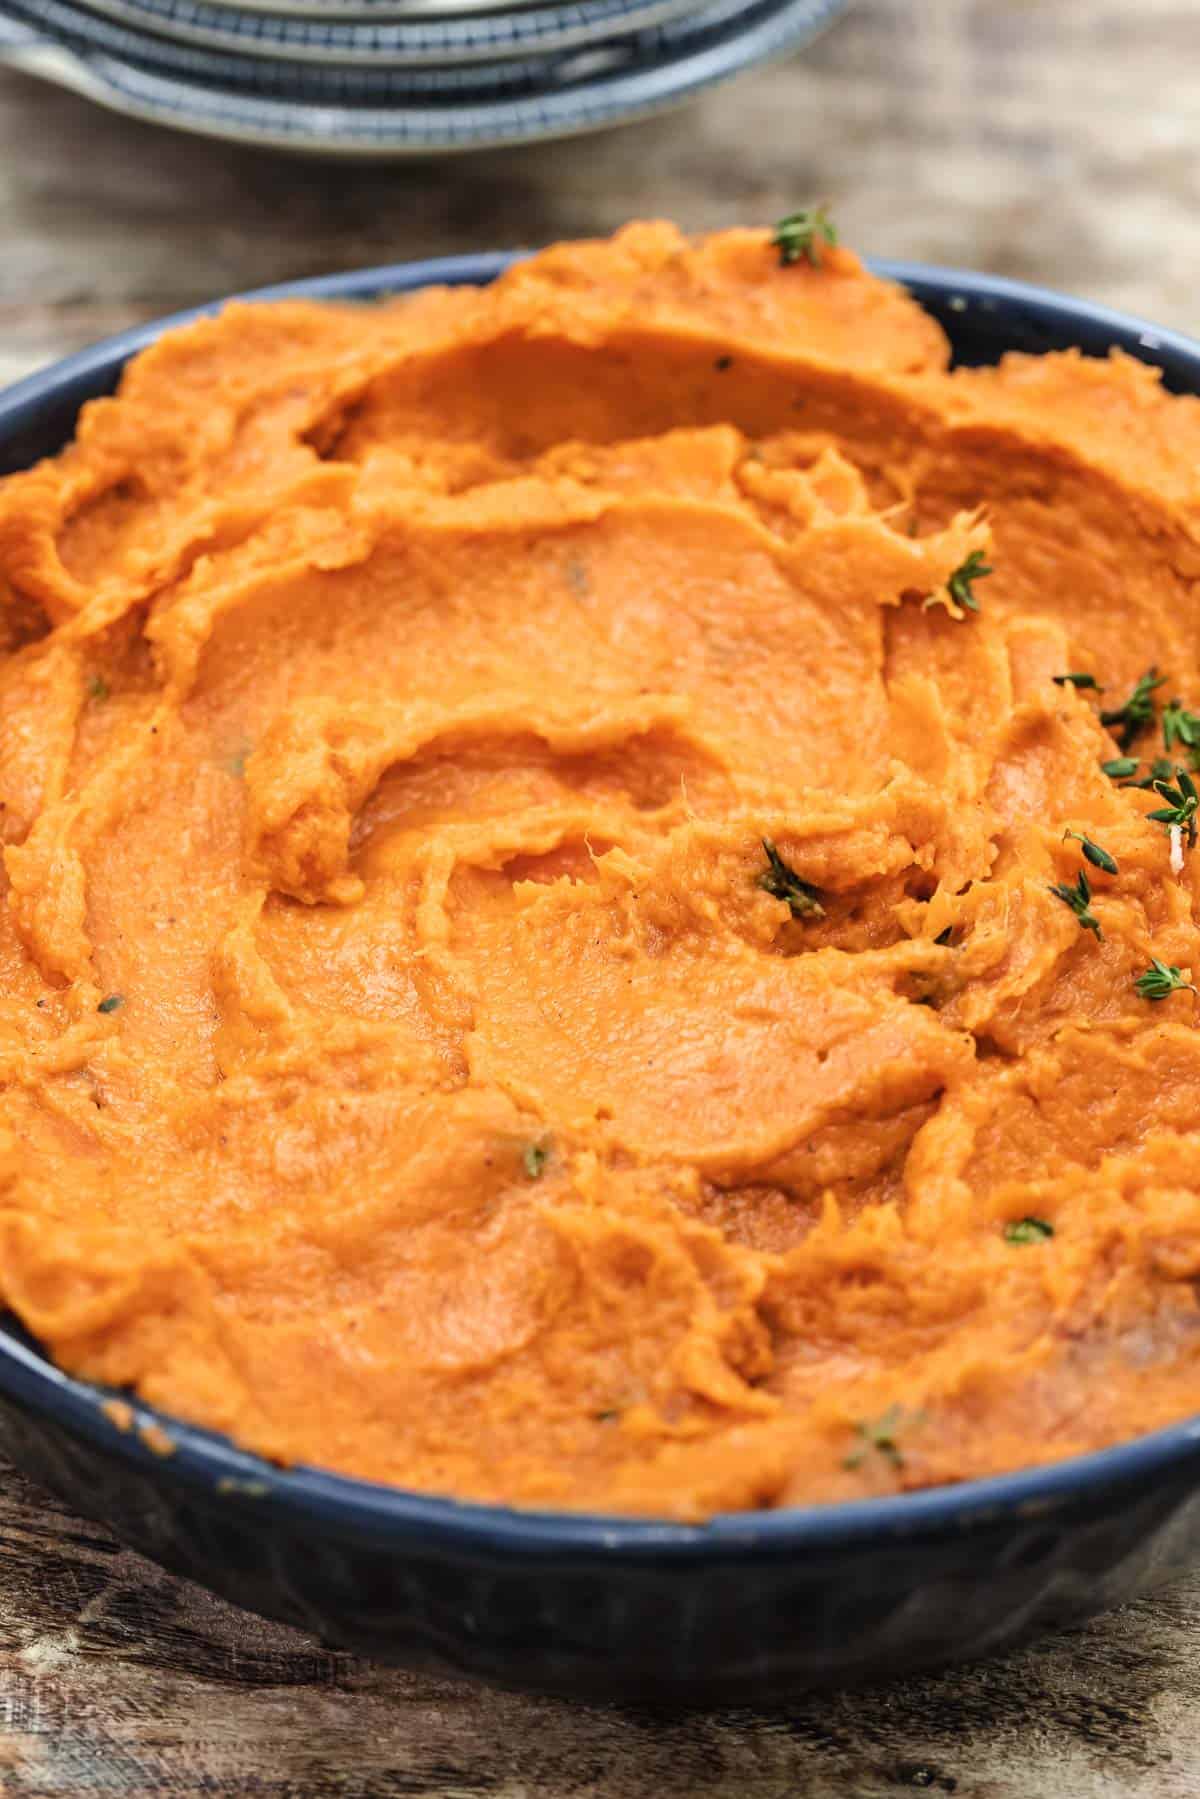 mashed sweet potatoes with garlic and thyme in a blue bowl.